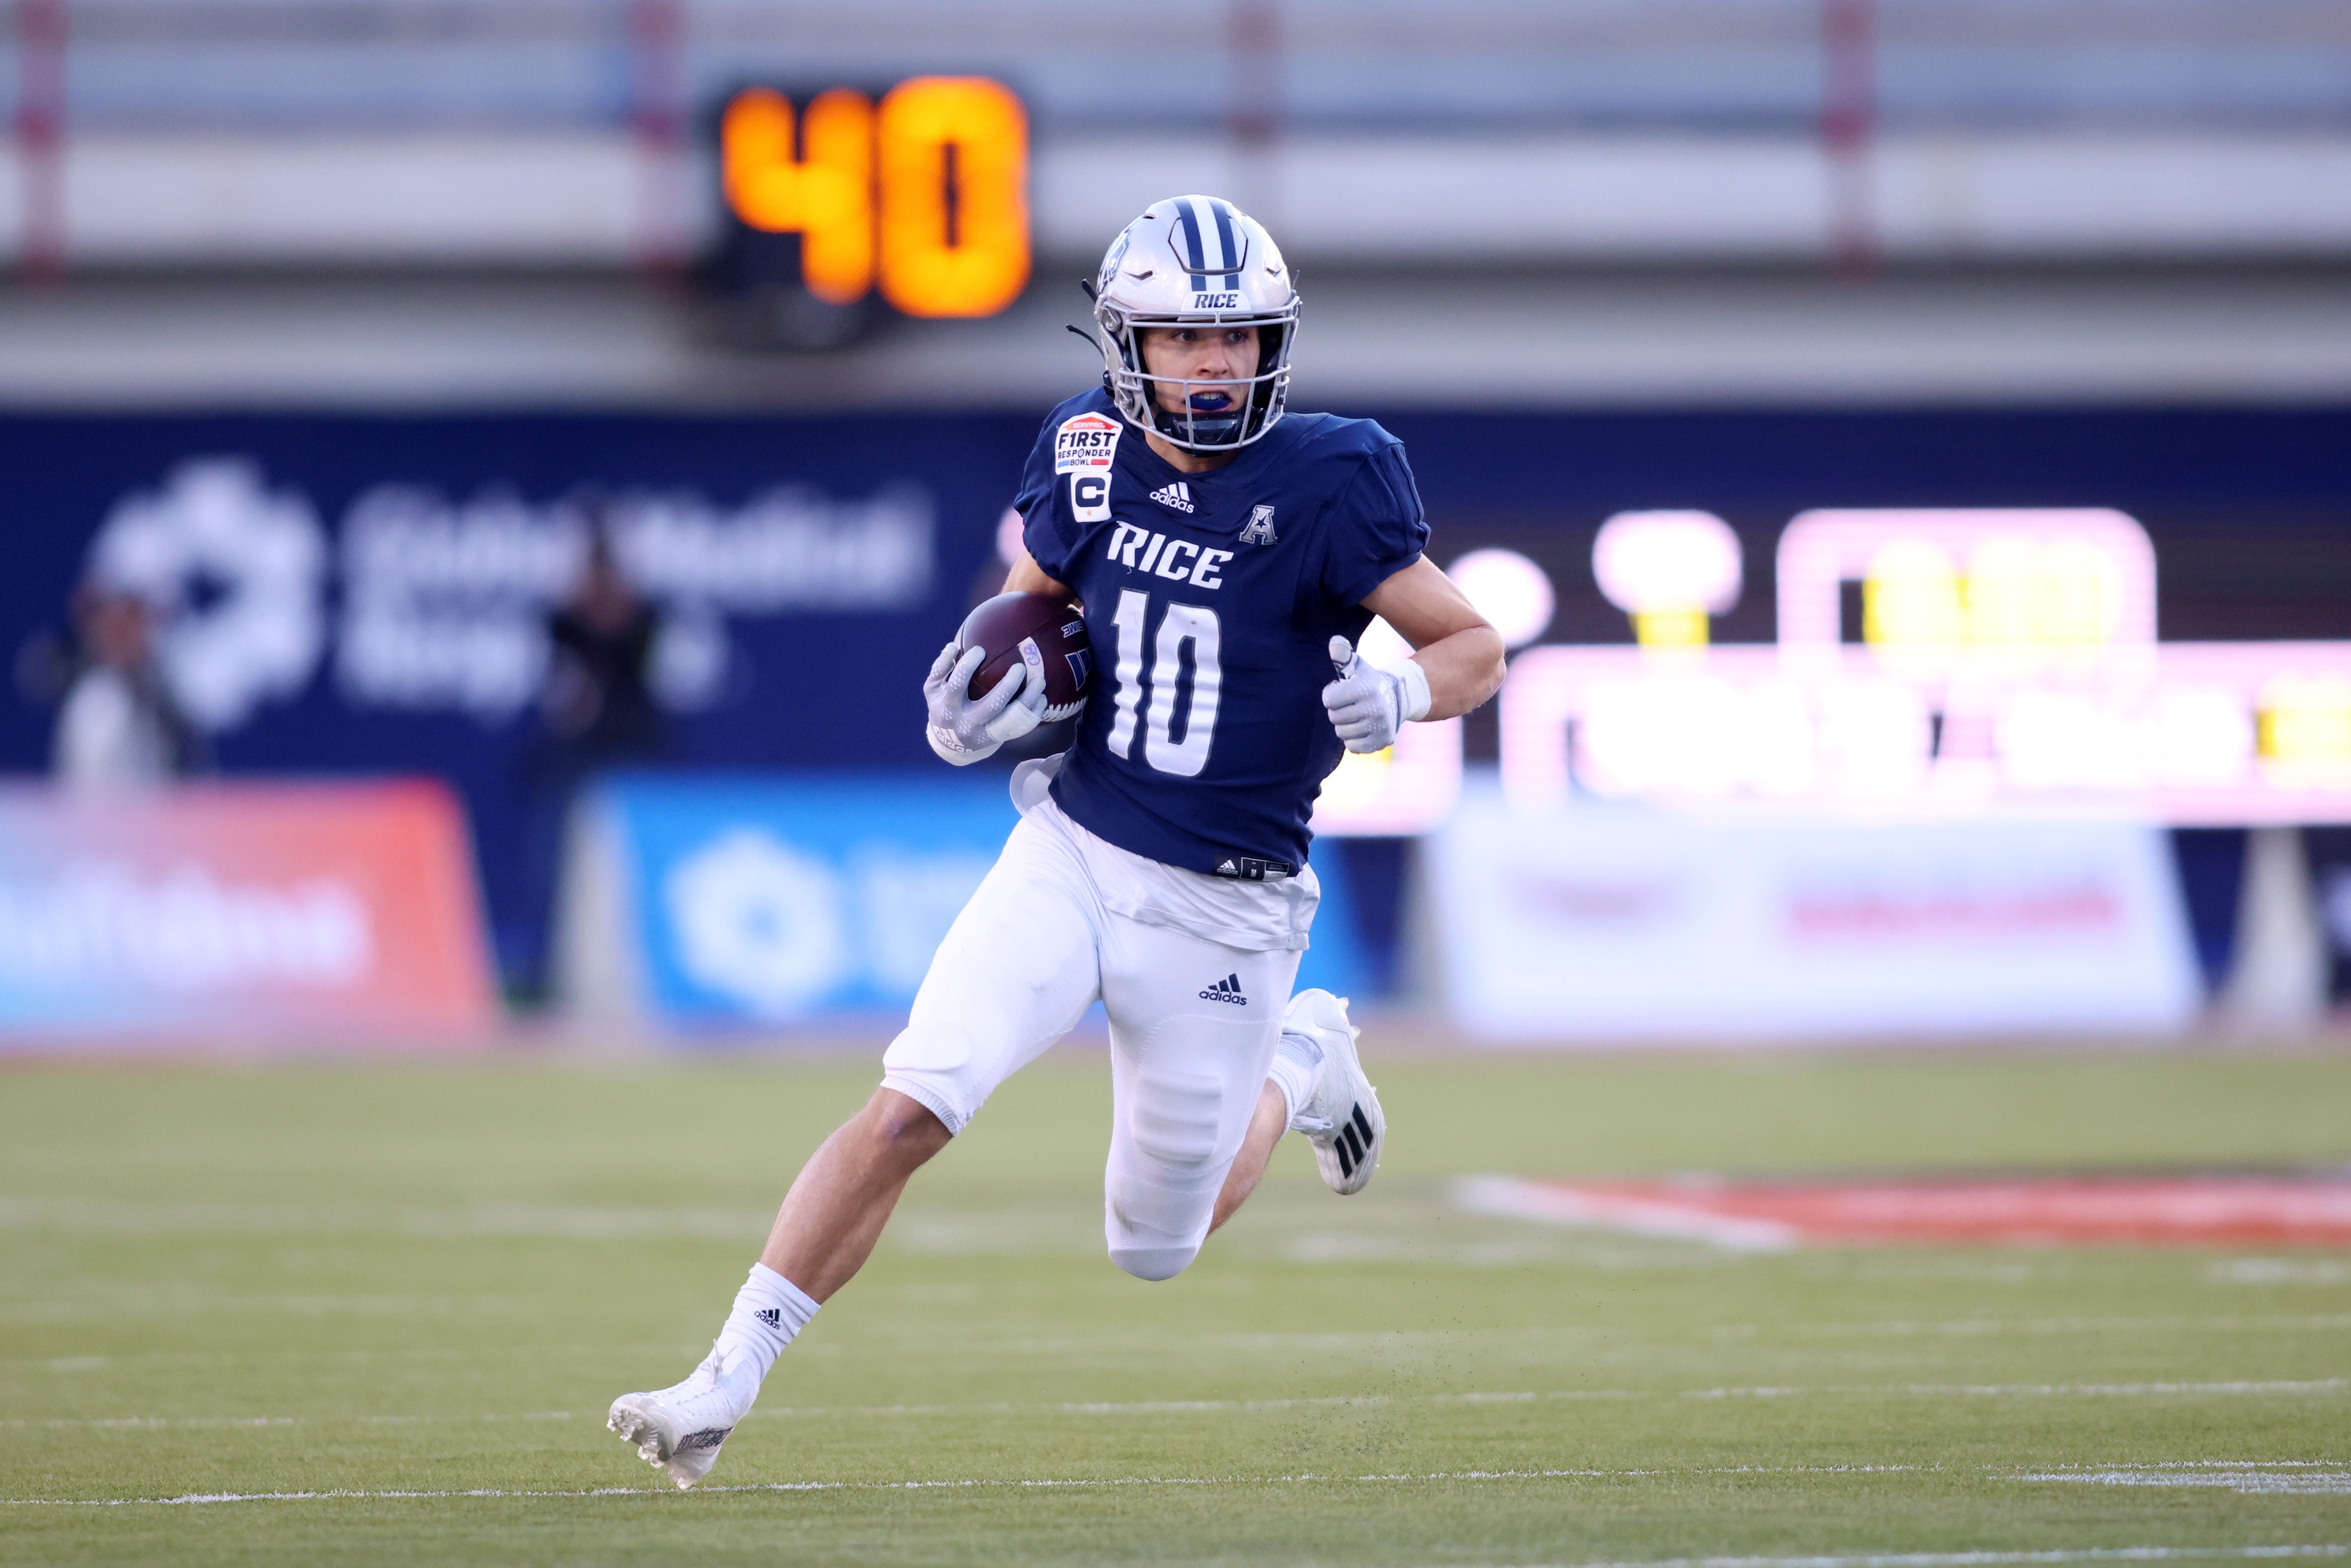 Rice Owls receiver Luke McCaffrey (10) runs after a catch against the Texas State Bobcats. Mandatory Credit: Tim Heitman-USA TODAY Sports